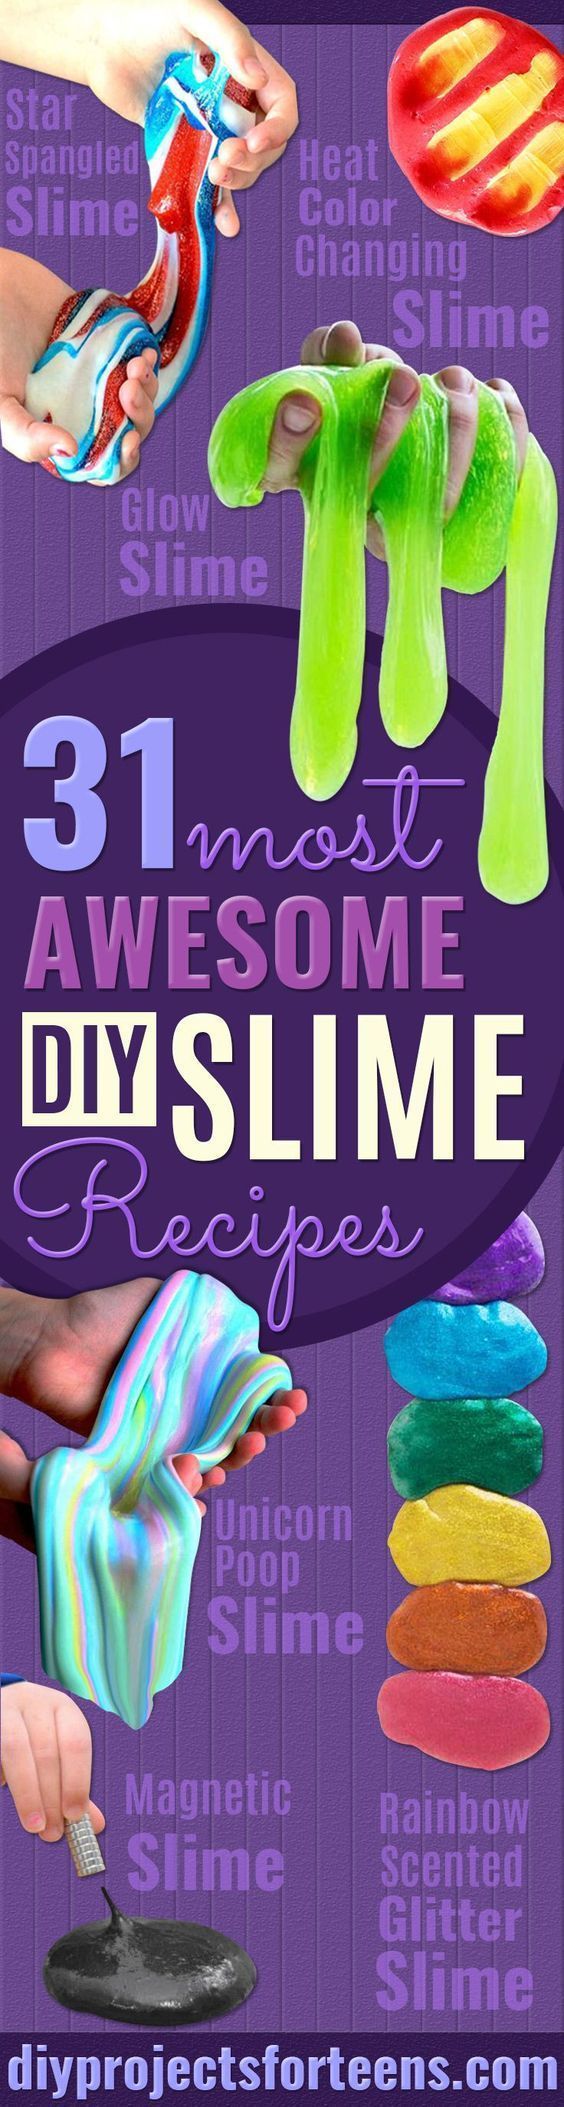 Best DIY Slime Recipes – Cool and Easy Slime Recipe Ideas Without Glue, Without Borax, For Kids, With Liquid Starch, Cornstarch